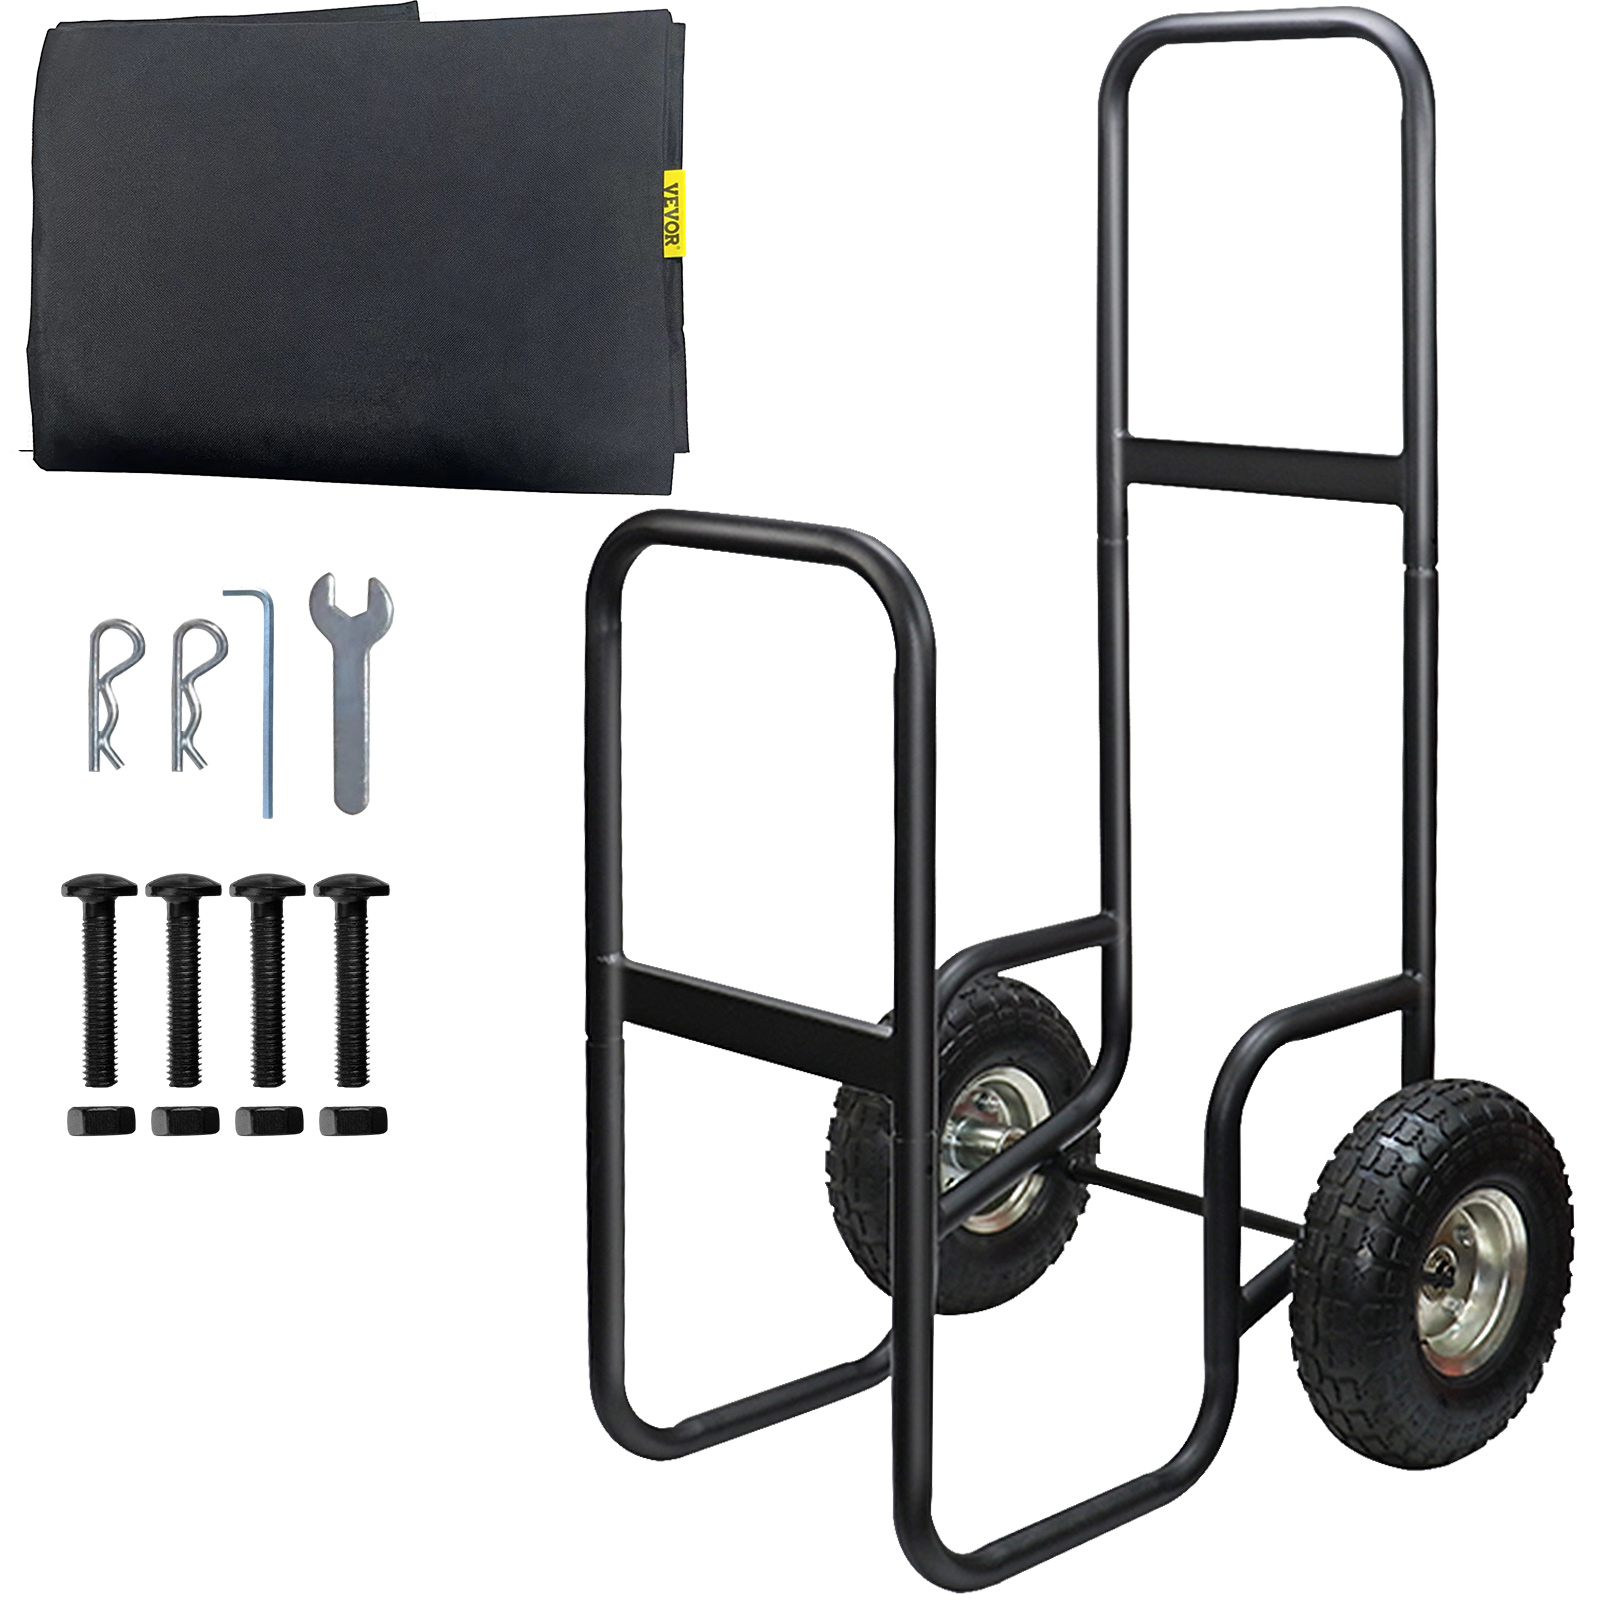 Steel Garden Cart,500 lbs,Removable Sides